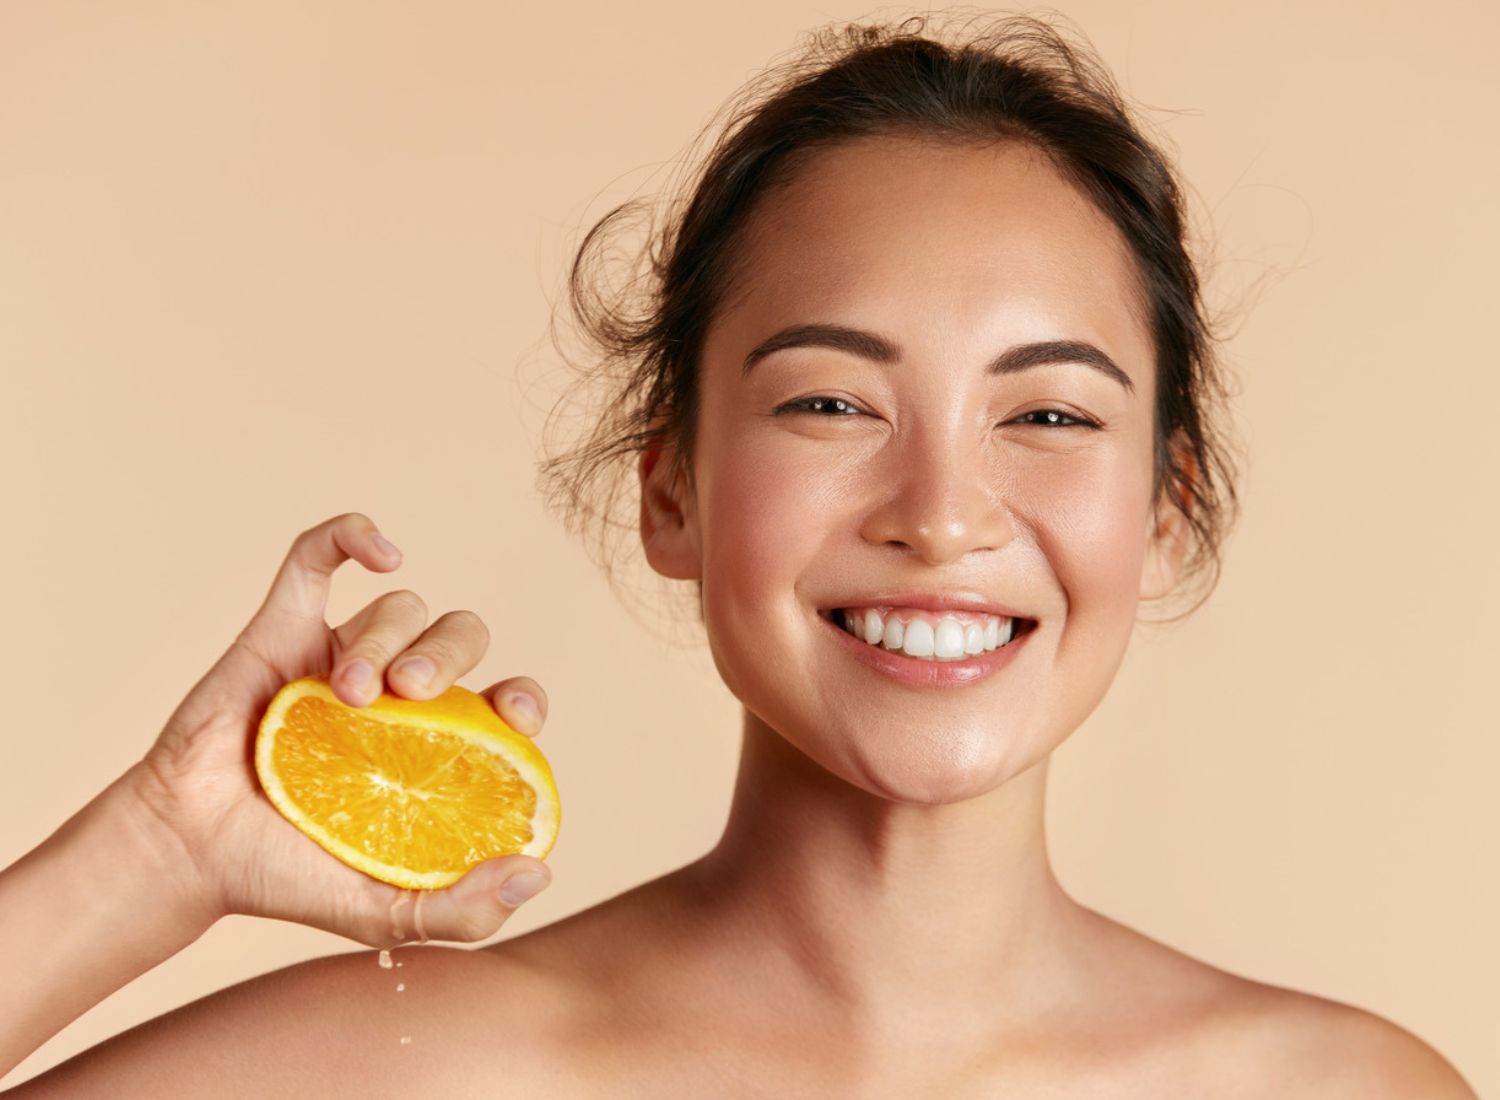 superfoods to make your skin glow: